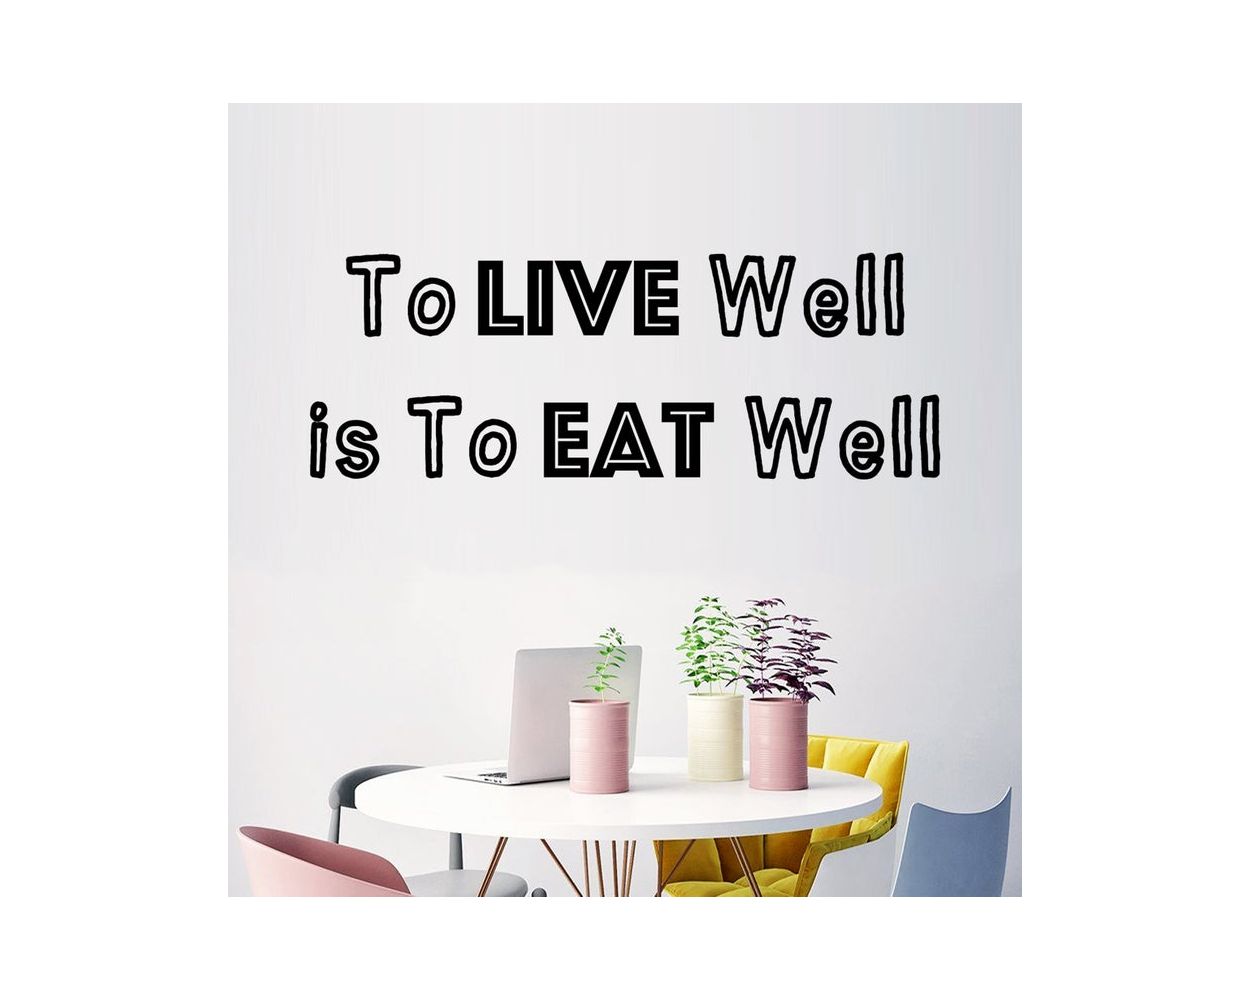 To Live Well is to Eat Well Quote Wall Stickers for kitchen wall decor. shop now